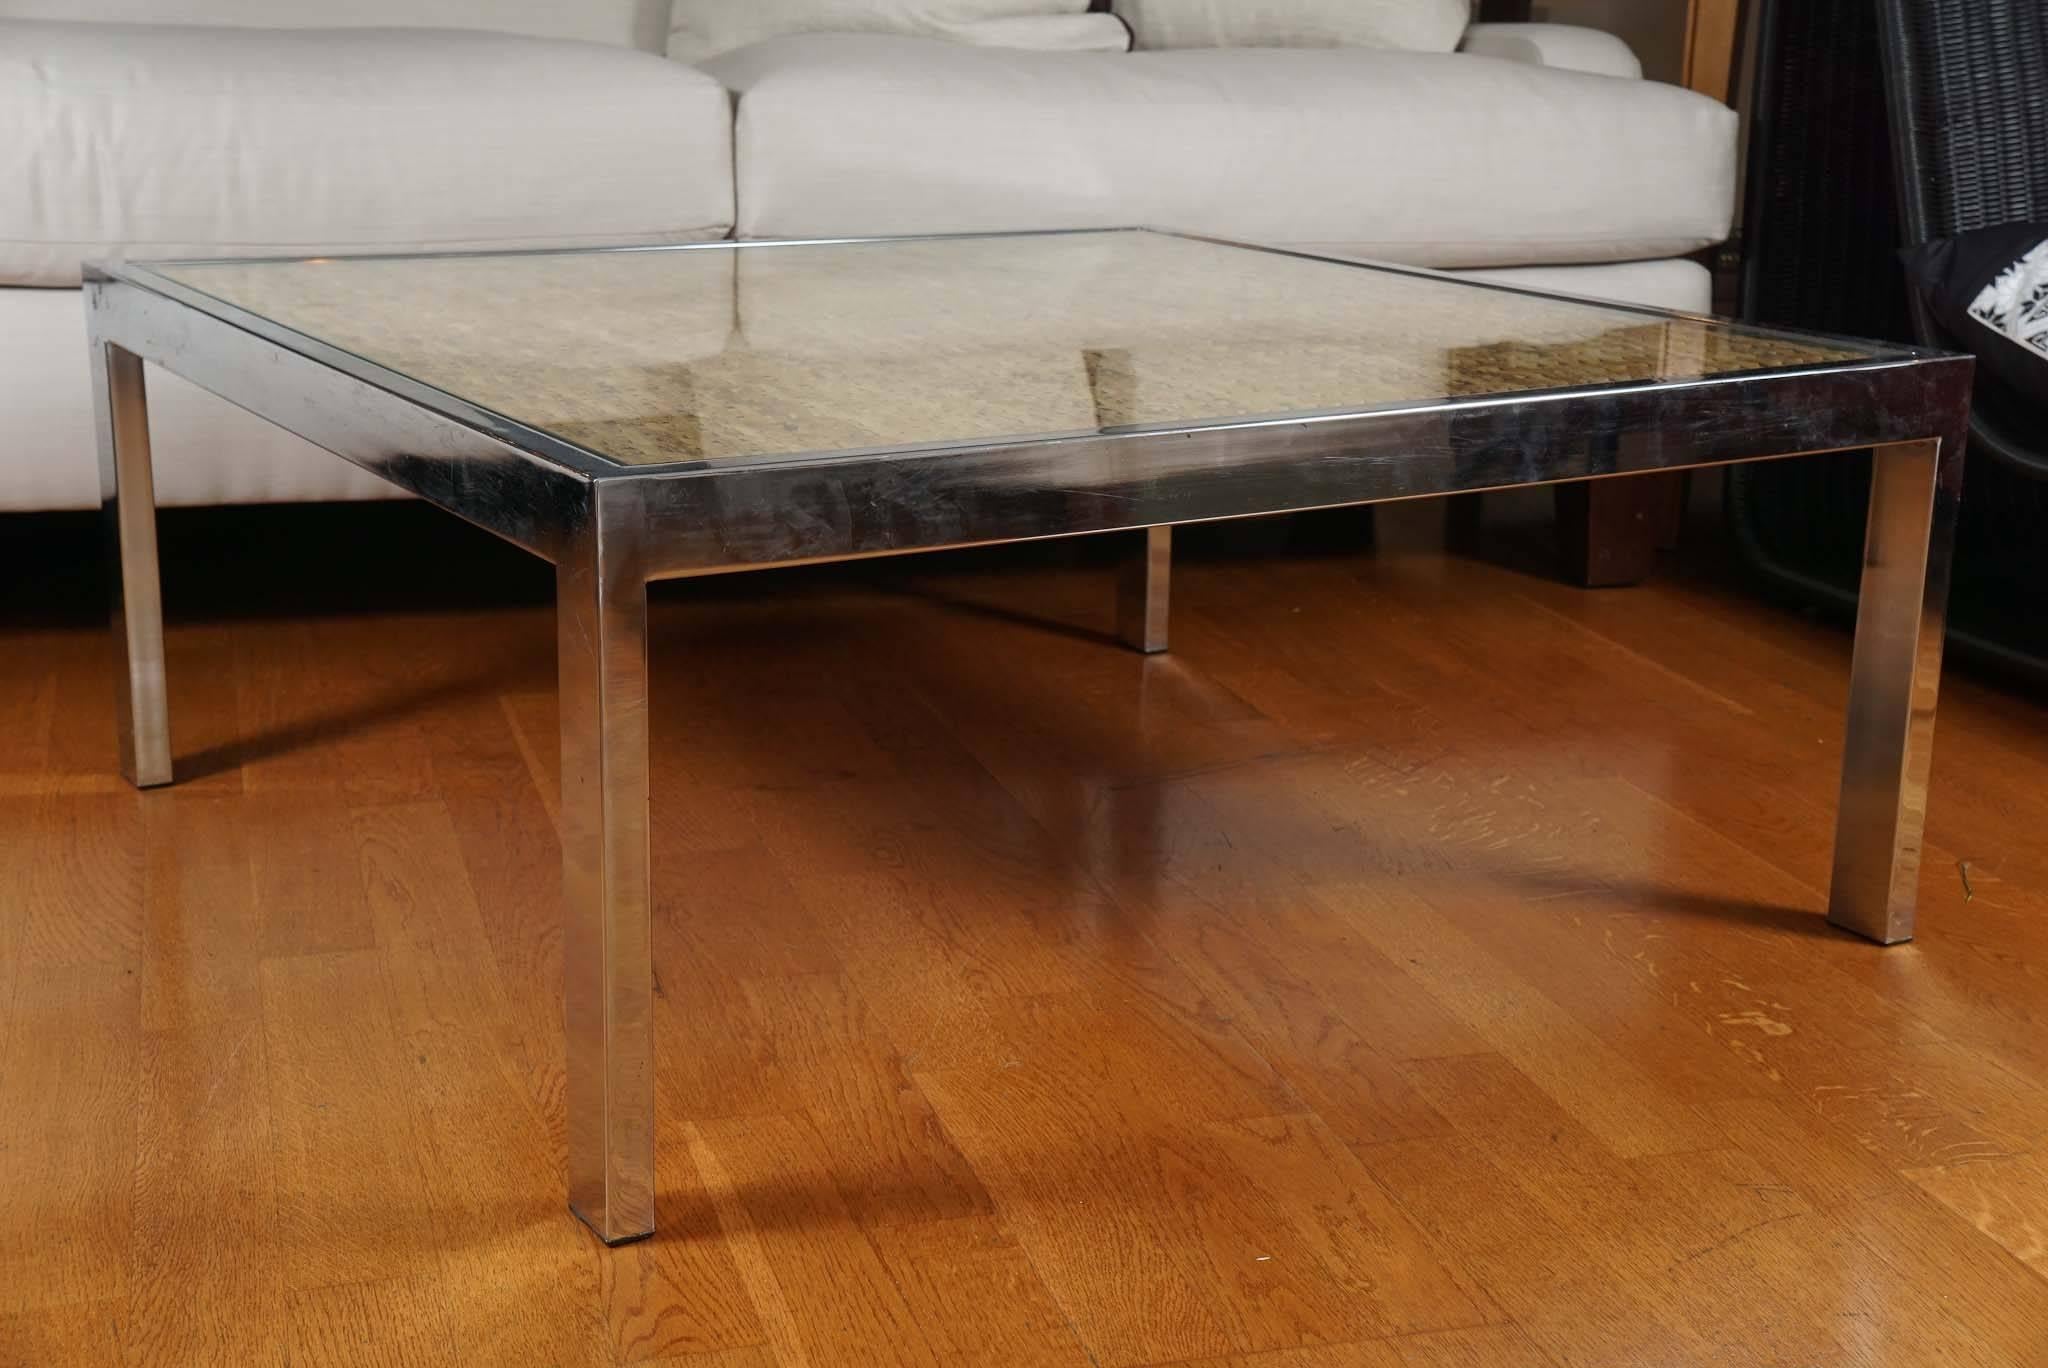 Square Mid-Century, polished chrome and wicker coffee table.